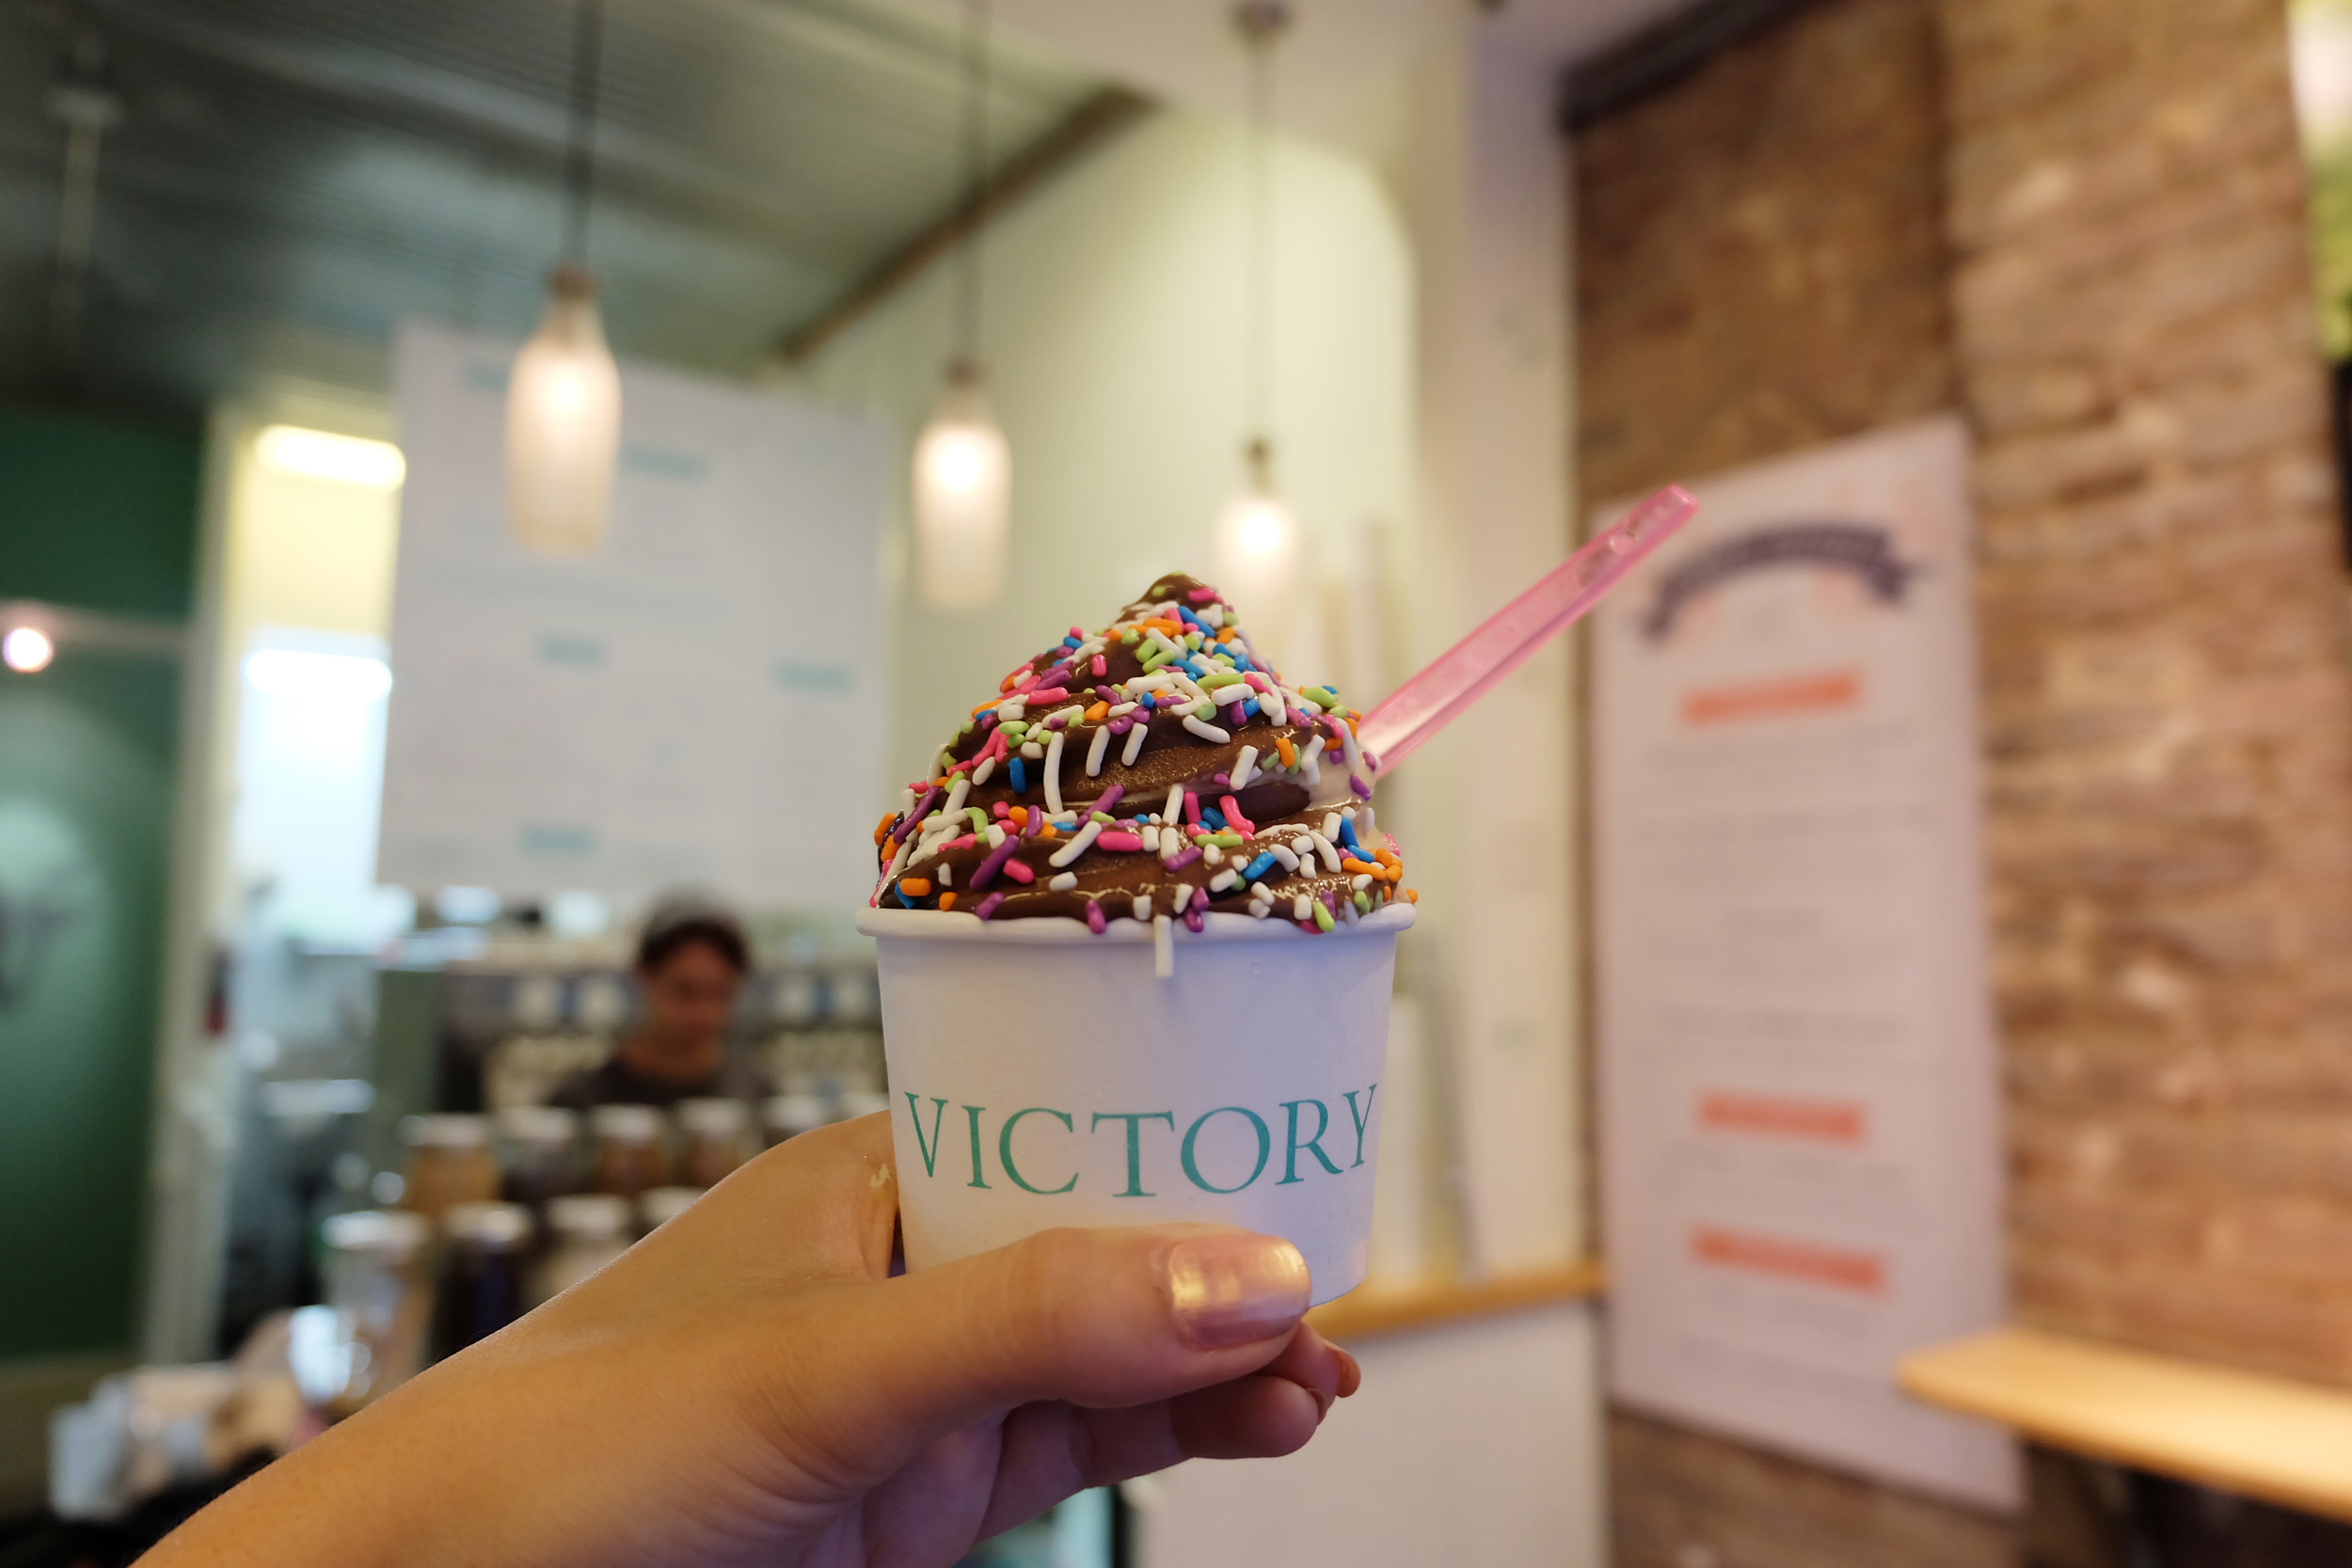 11. Victory Garden: Victory Garden serves up the only goat-milk soft-serve around. The Turkish-inspired goat-milk ice cream is lower in fat and calories than traditional soft-serve and is lactose-intolerance friendly. Try one of their fun seasonal flavors or the classic salted caramel swirl and chocolate and choose from a long list of unique toppings. 